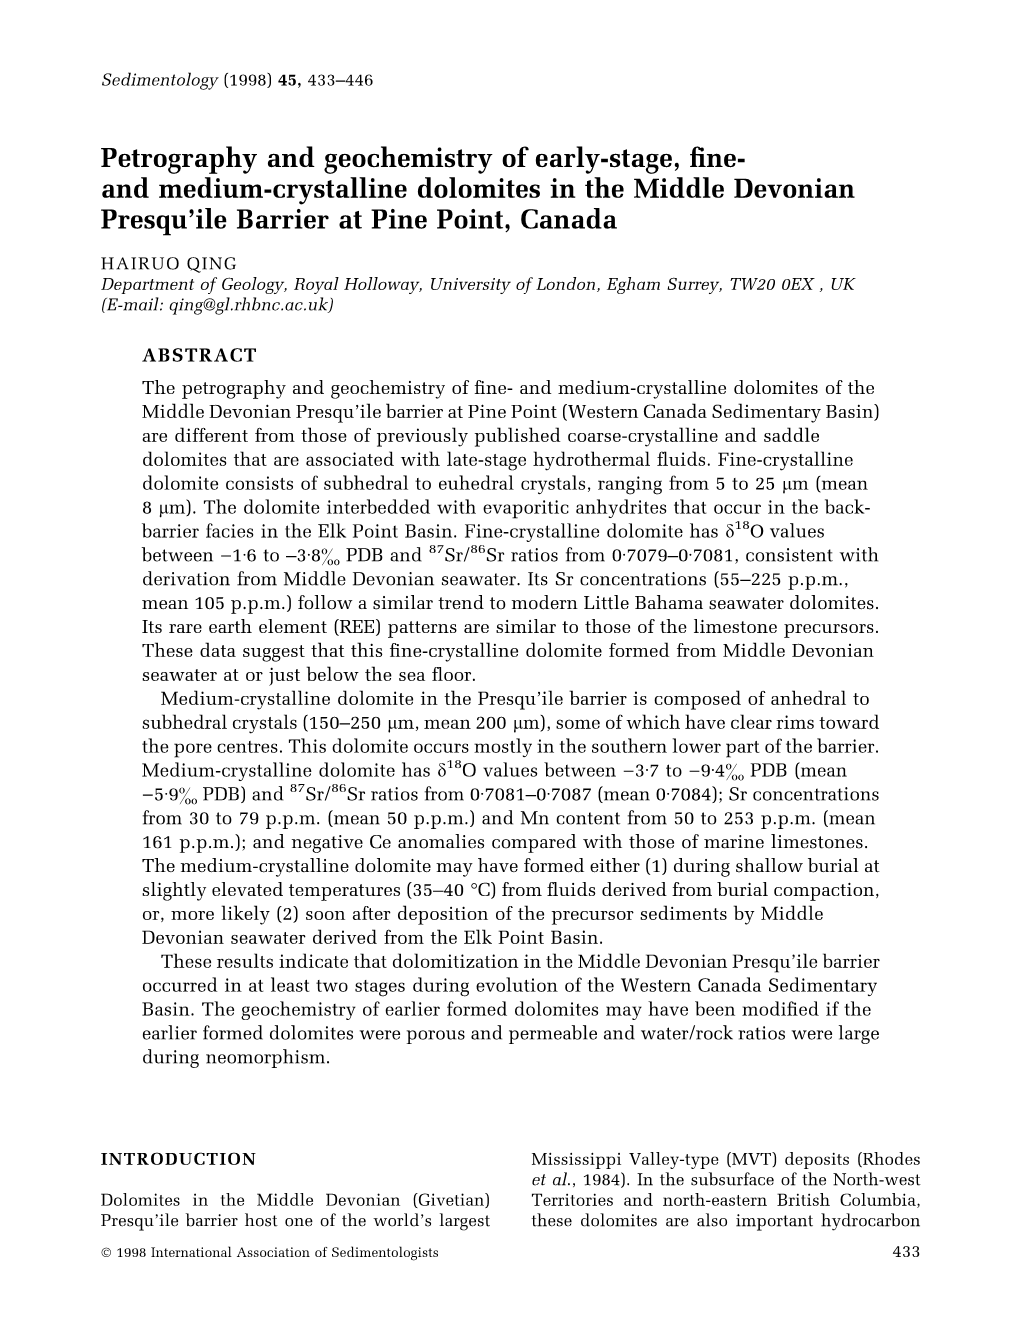 Petrography and Geochemistry of Early-Stage, ®Ne- and Medium-Crystalline Dolomites in the Middle Devonian Presqu'ile Barrier at Pine Point, Canada